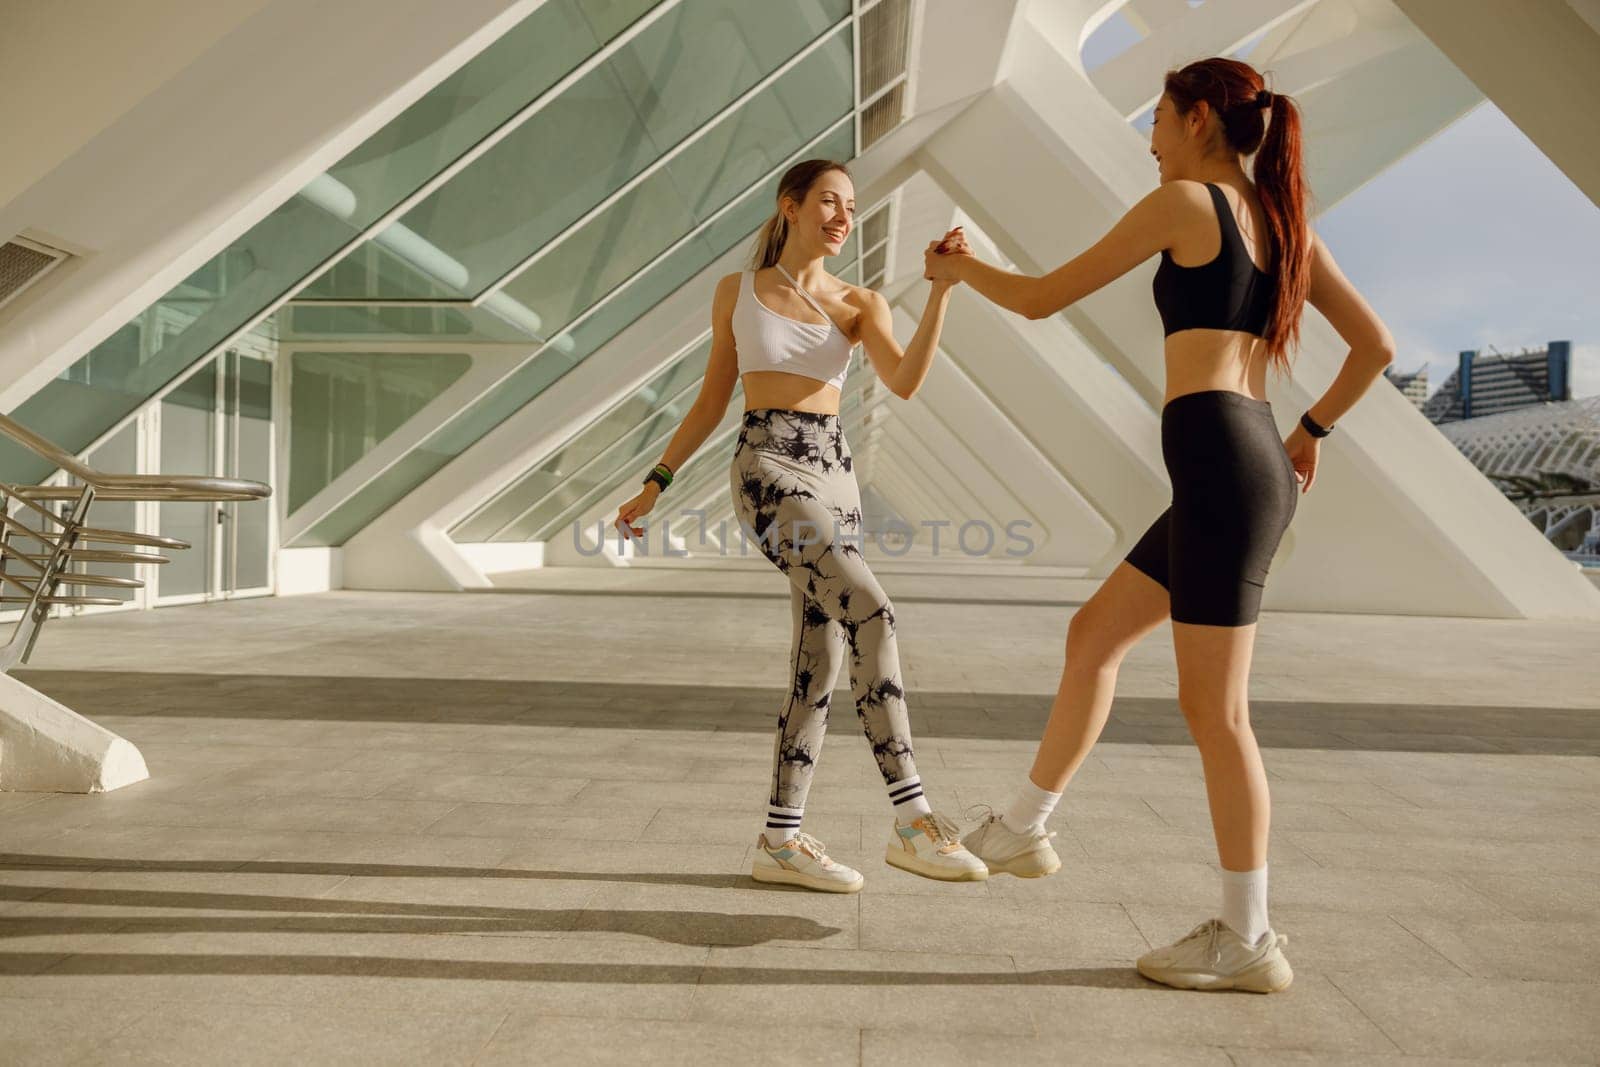 Sporty women greeting together outdoor doing gesture of shake hand after exercising